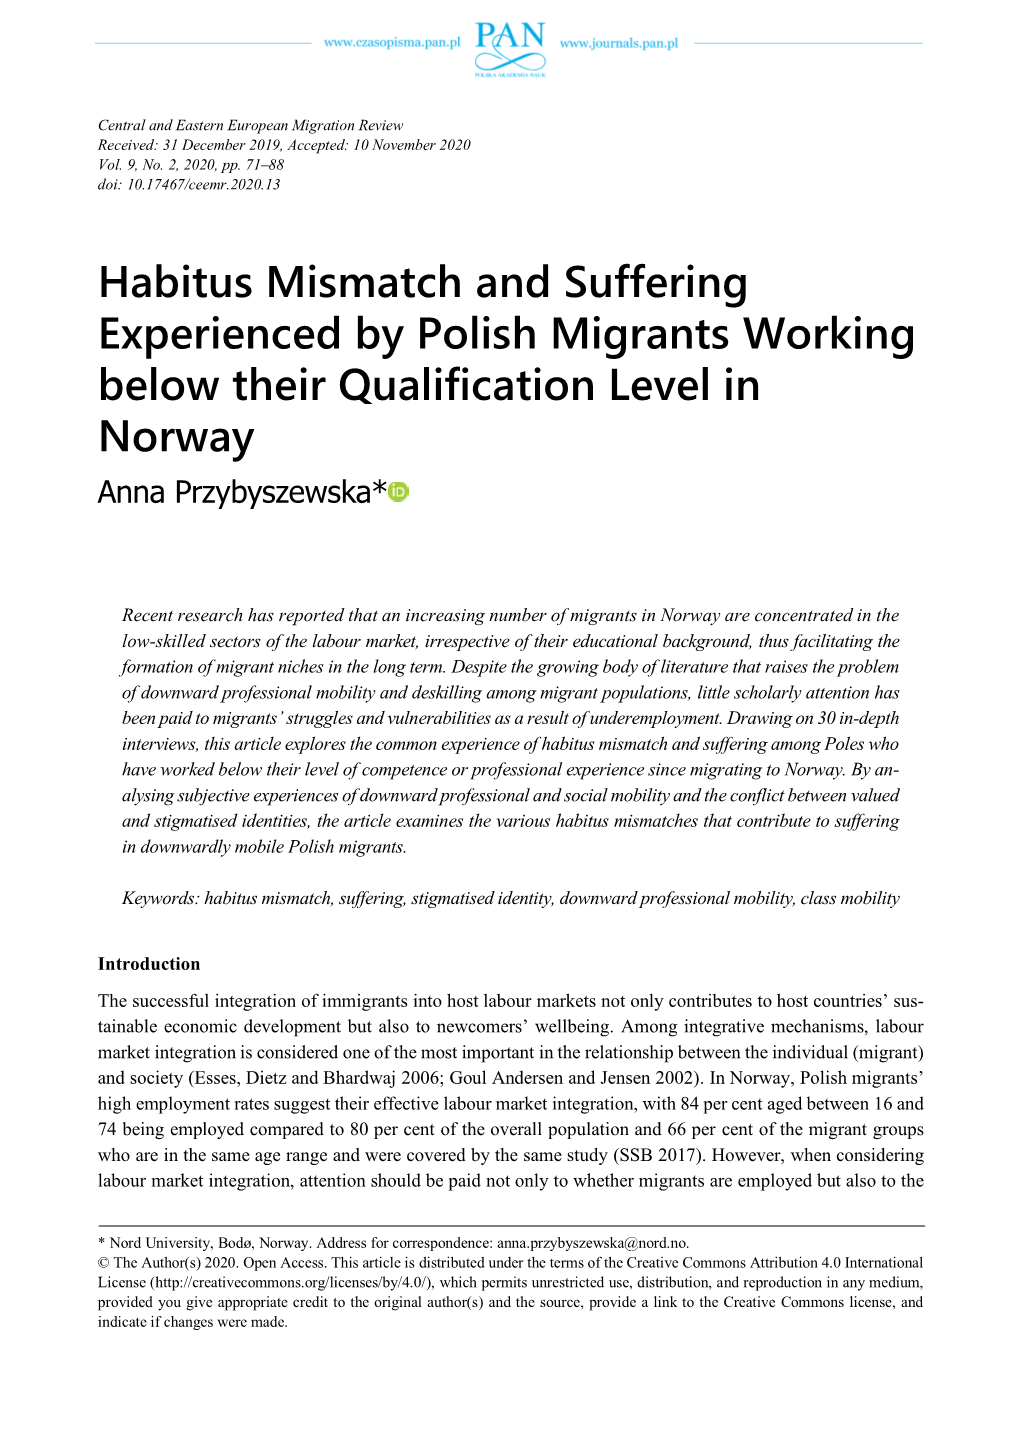 Habitus Mismatch and Suffering Experienced by Polish Migrants Working Below Their Qualification Level in Norway Anna Przybyszewska*